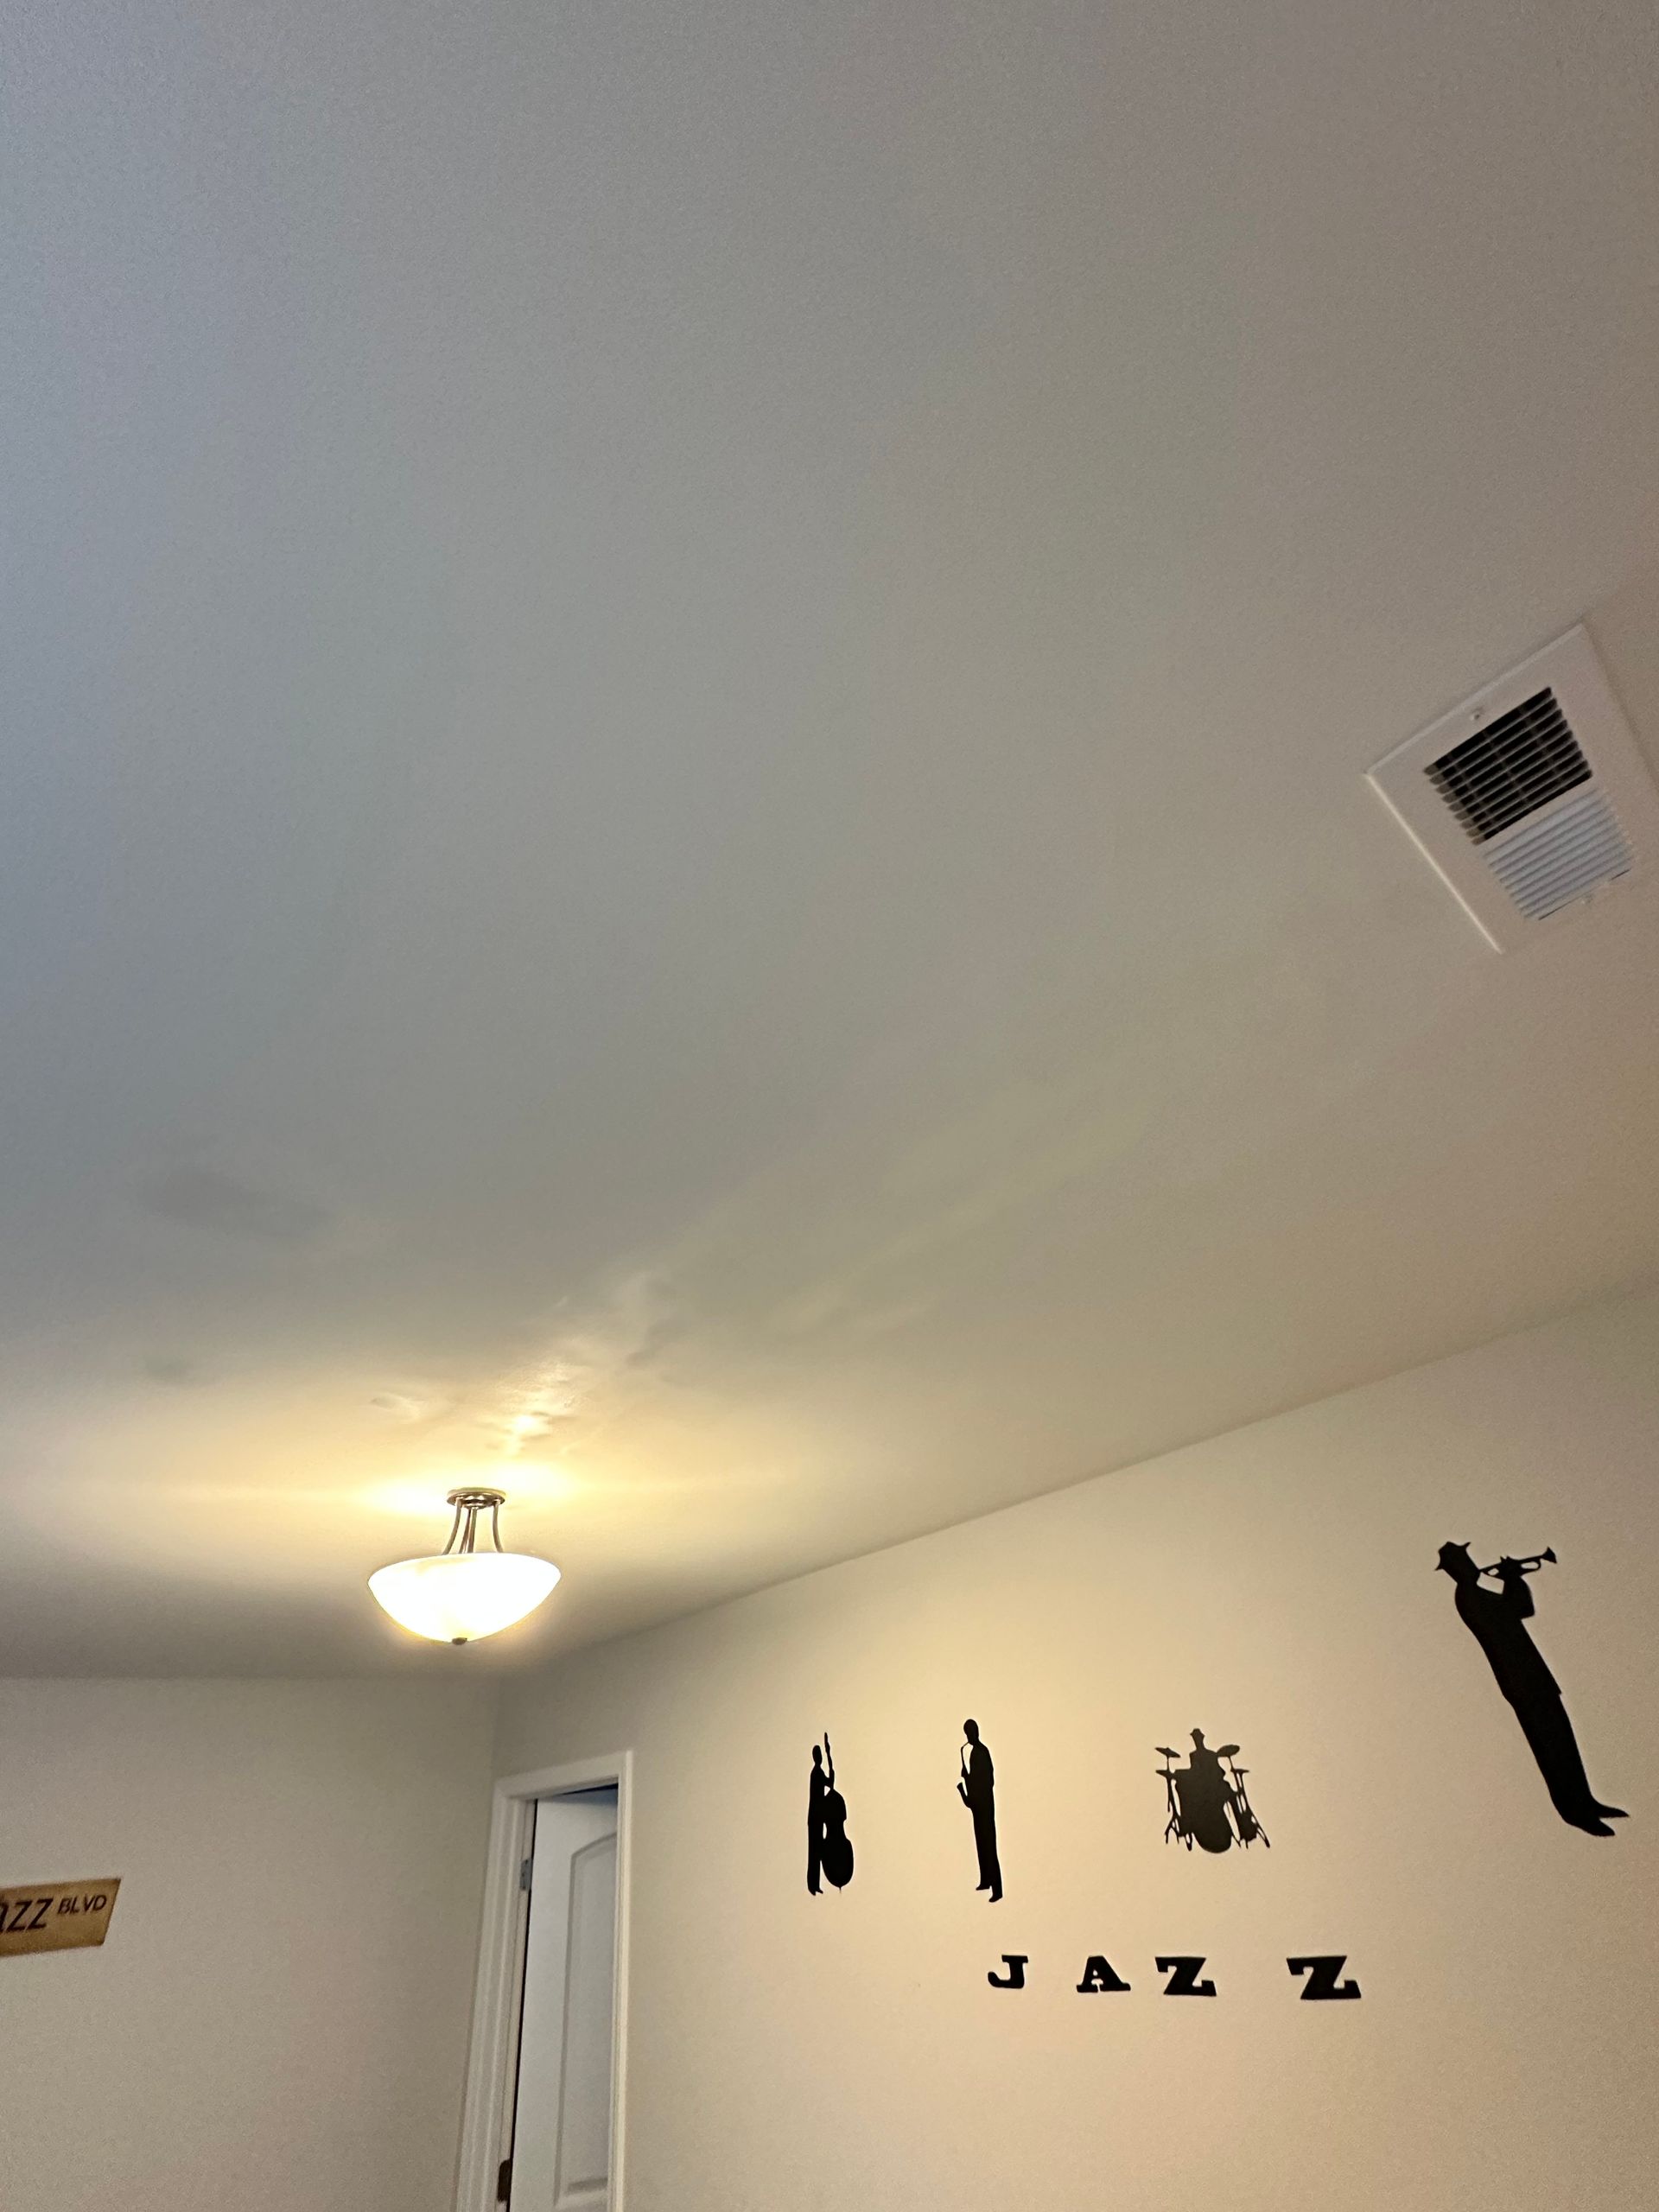 After Wall Paint - A & A Painting & Construction - Greensboro, NC